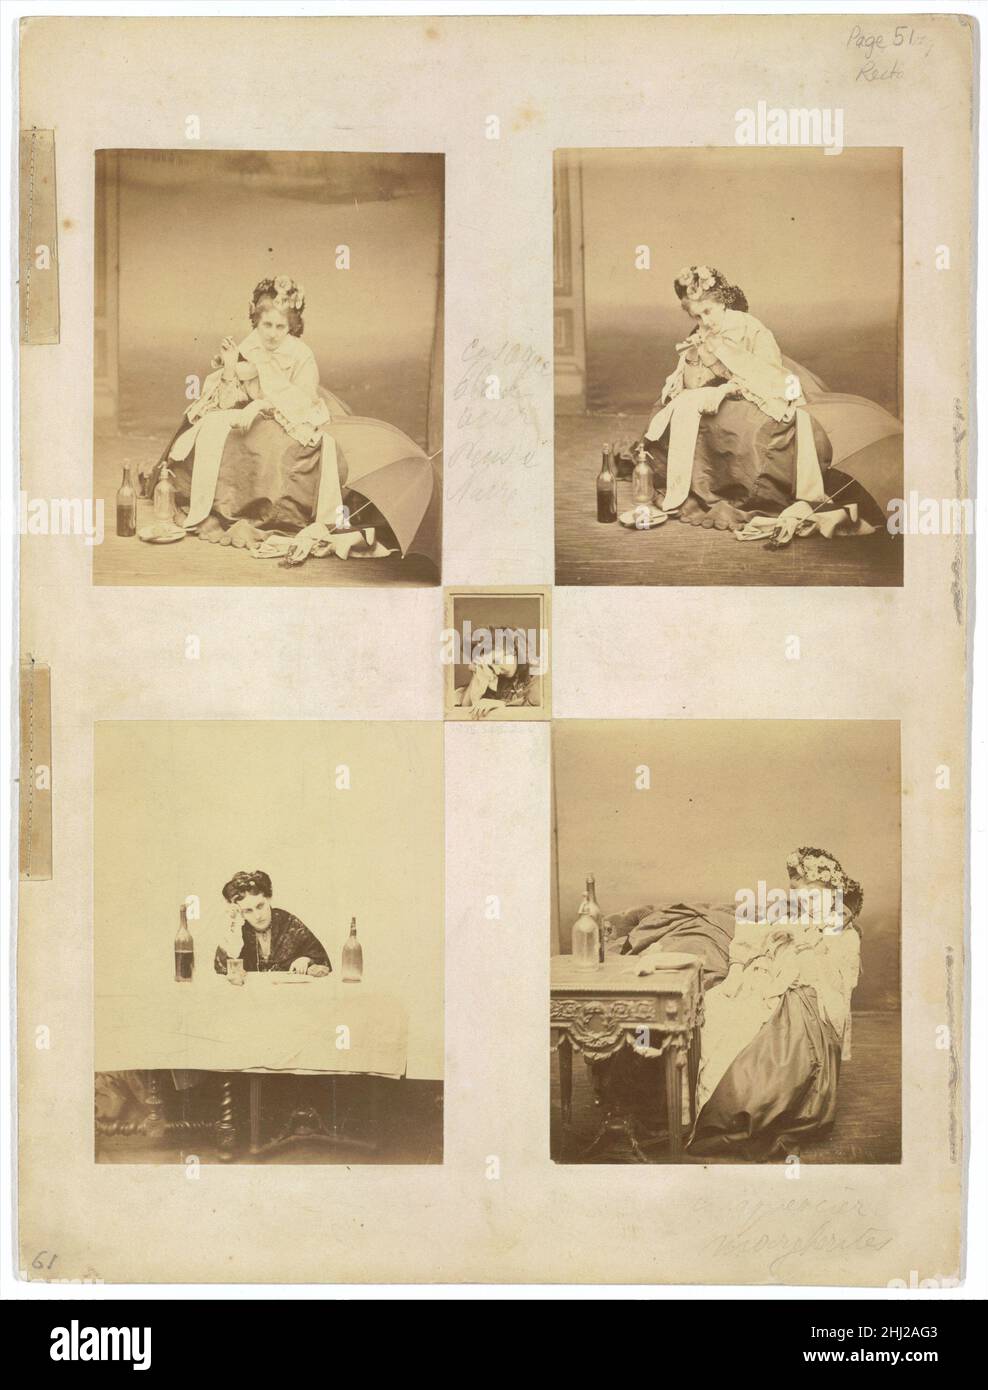 [Album page with ten photographs of La Comtesse mounted recto and verso] 1861–67 Pierre-Louis Pierson French The photographs laid out by the countess on this page illustrate different stages in a busy day. Midday (top left) shows her in street clothes, ready to partake of a country picnic. In Ernani (top right), a reference to Verdi's opera, she is blowing a small hunting horn. Nightlife scenes show her enjoying herself in a private room of a big restaurant on the boulevard or sitting forlorn in the back room of a brasserie or dance hall. The photograph at the center may have been inspired by Stock Photo